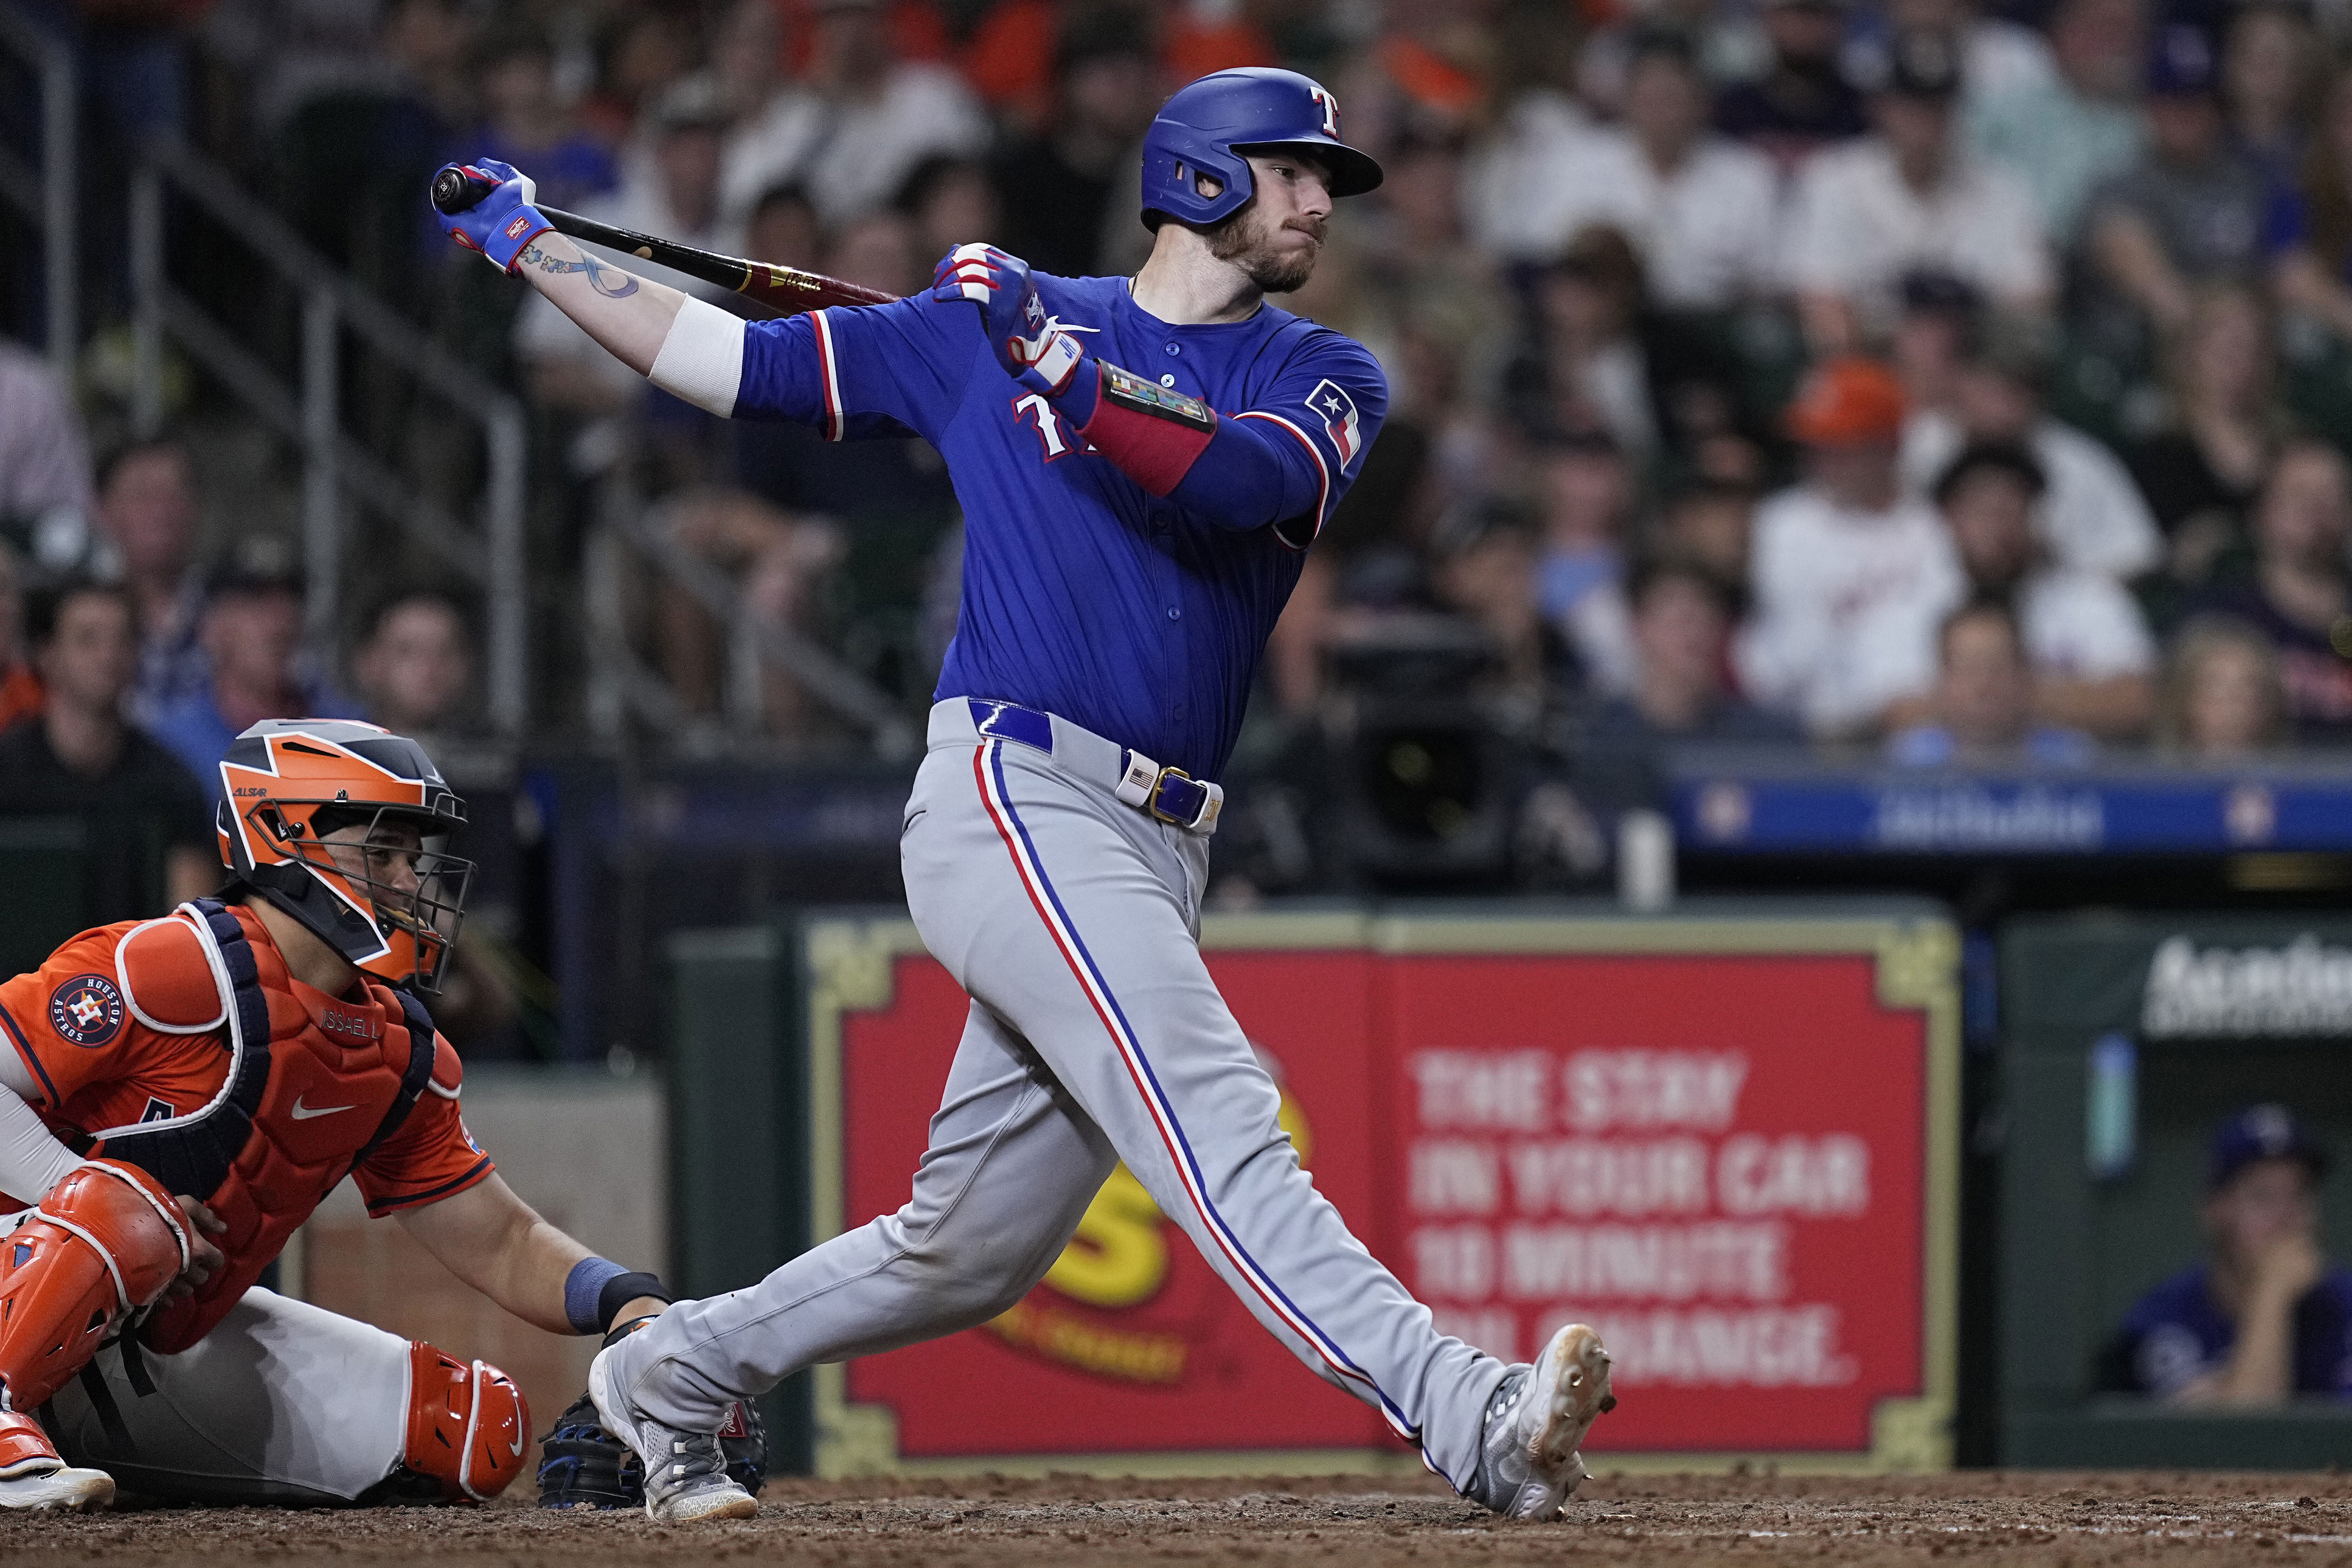 heim homers with 4 rbis as rangers win 12-8 and drop astros to to 4-11